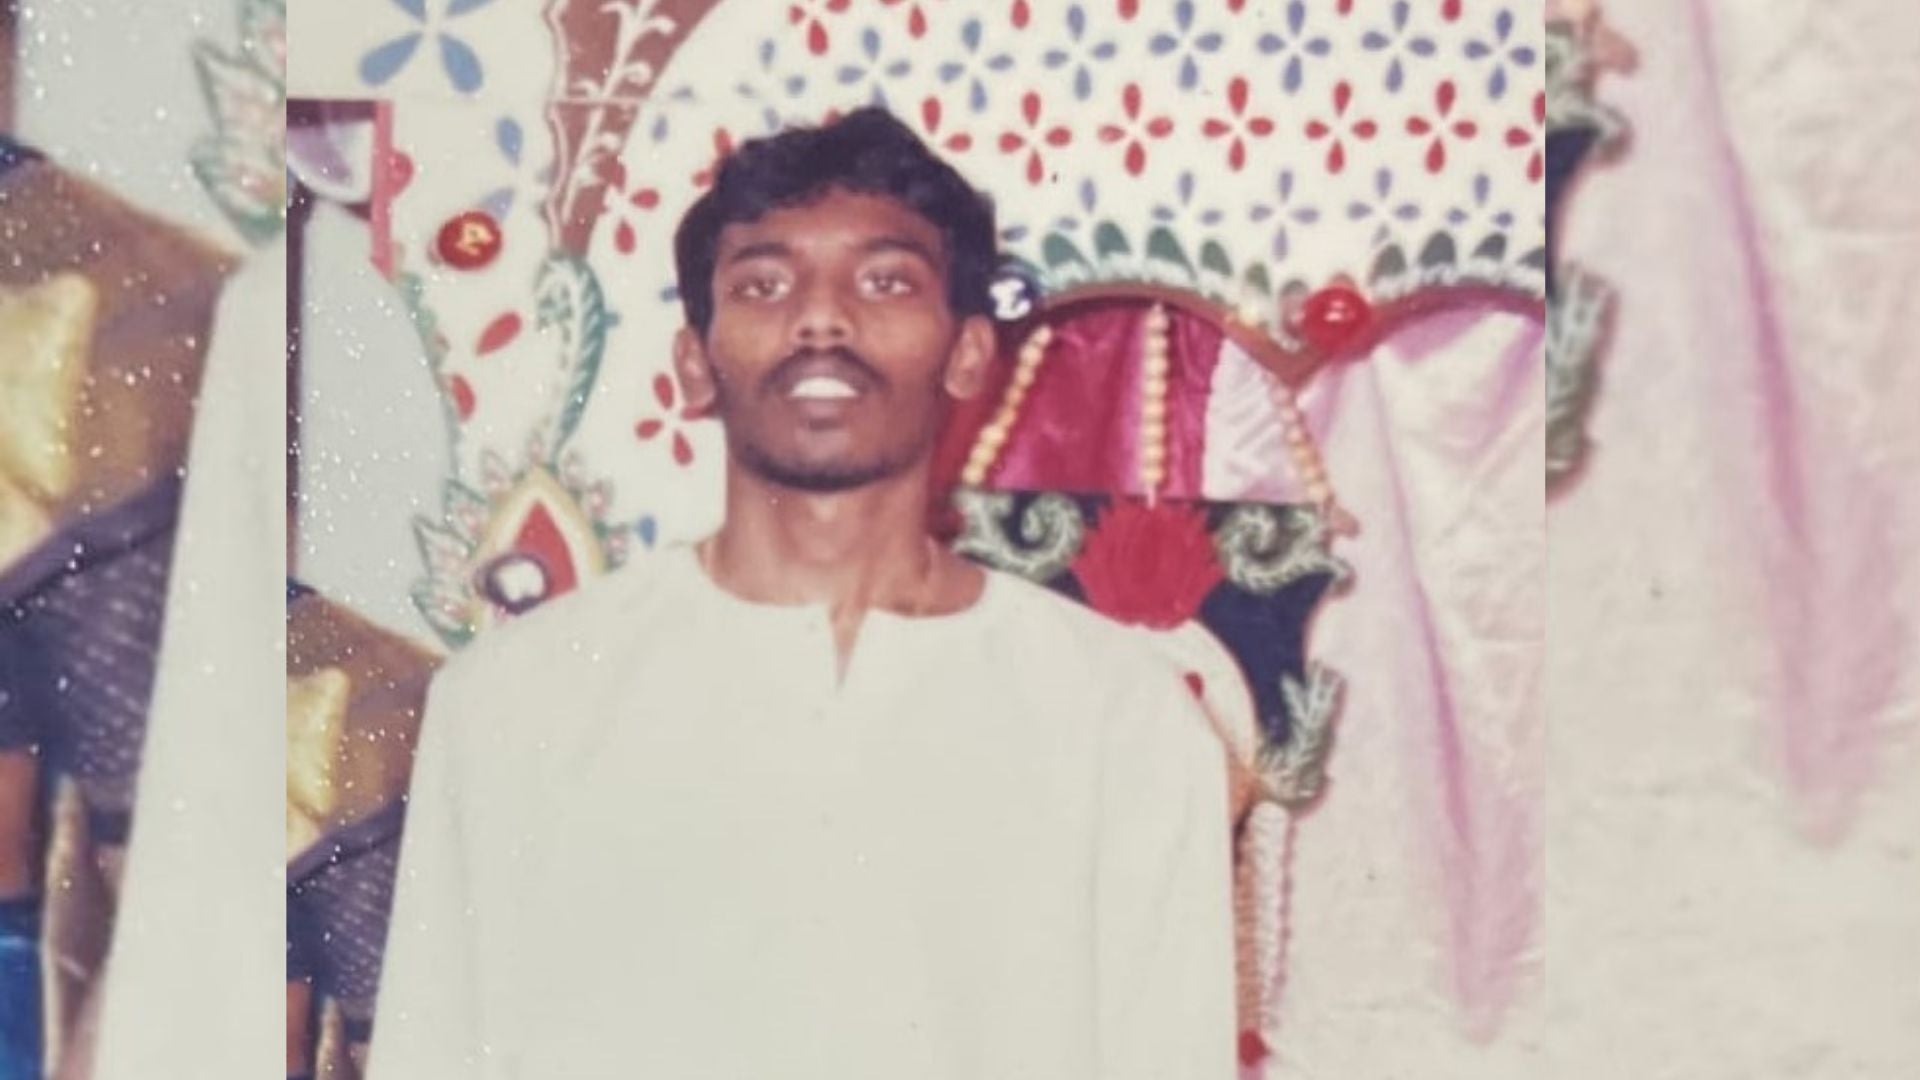 Execution of Singaporean Tamil national Tangaraju Suppiah will be carried out on 26 April at Changi prison, officials say